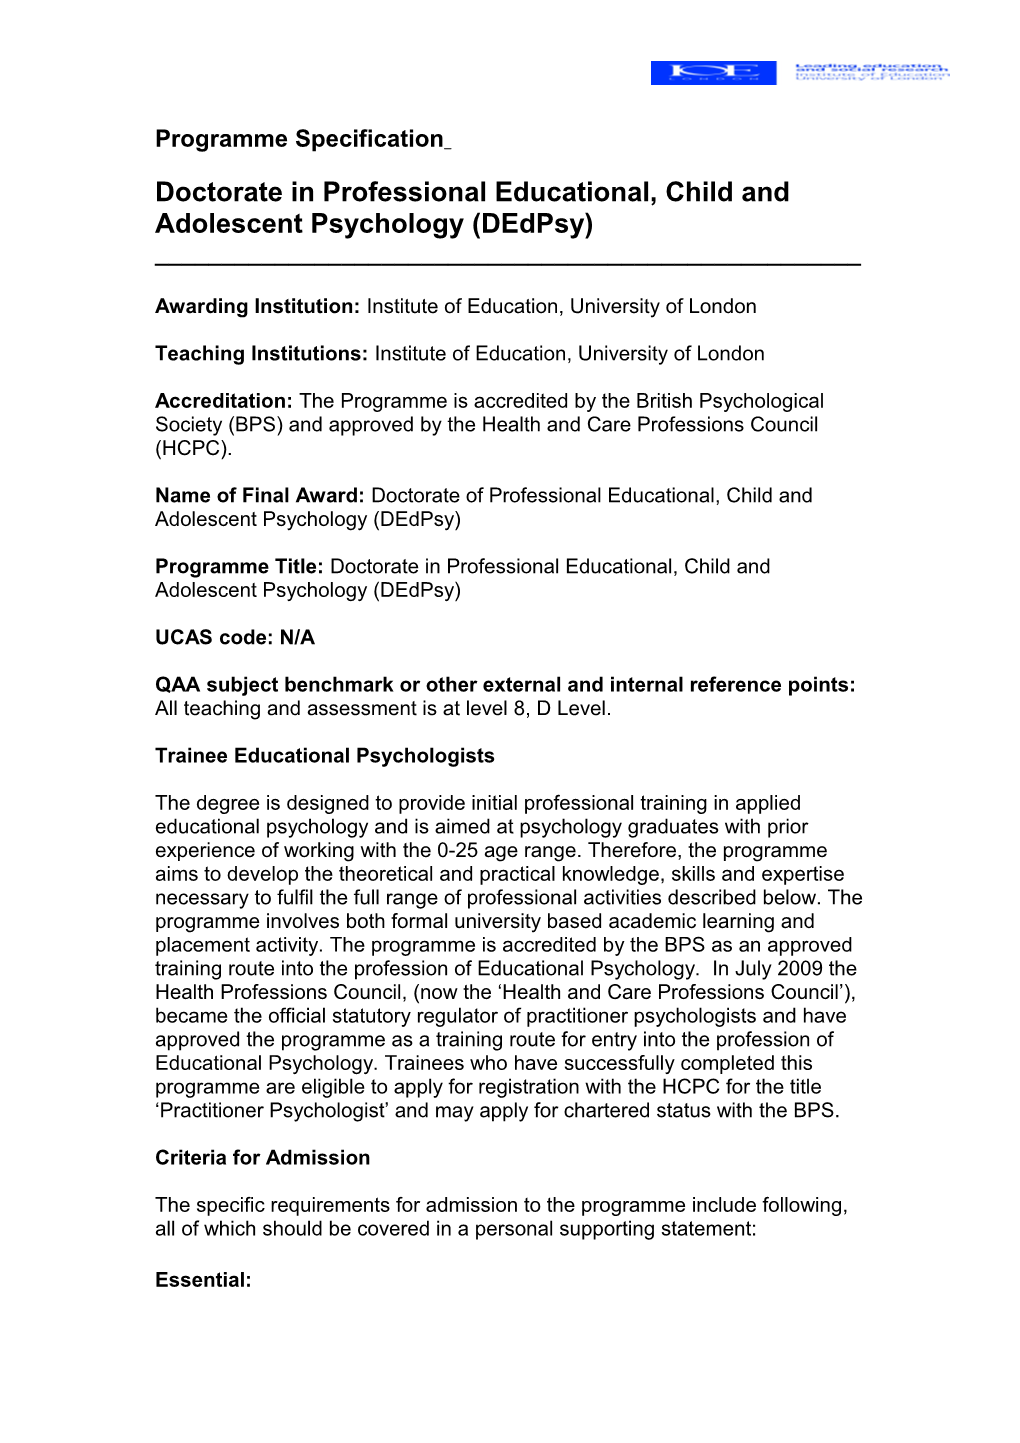 Doctorate in Professional Educational, Child and Adolescent Psychology (Dedpsy)